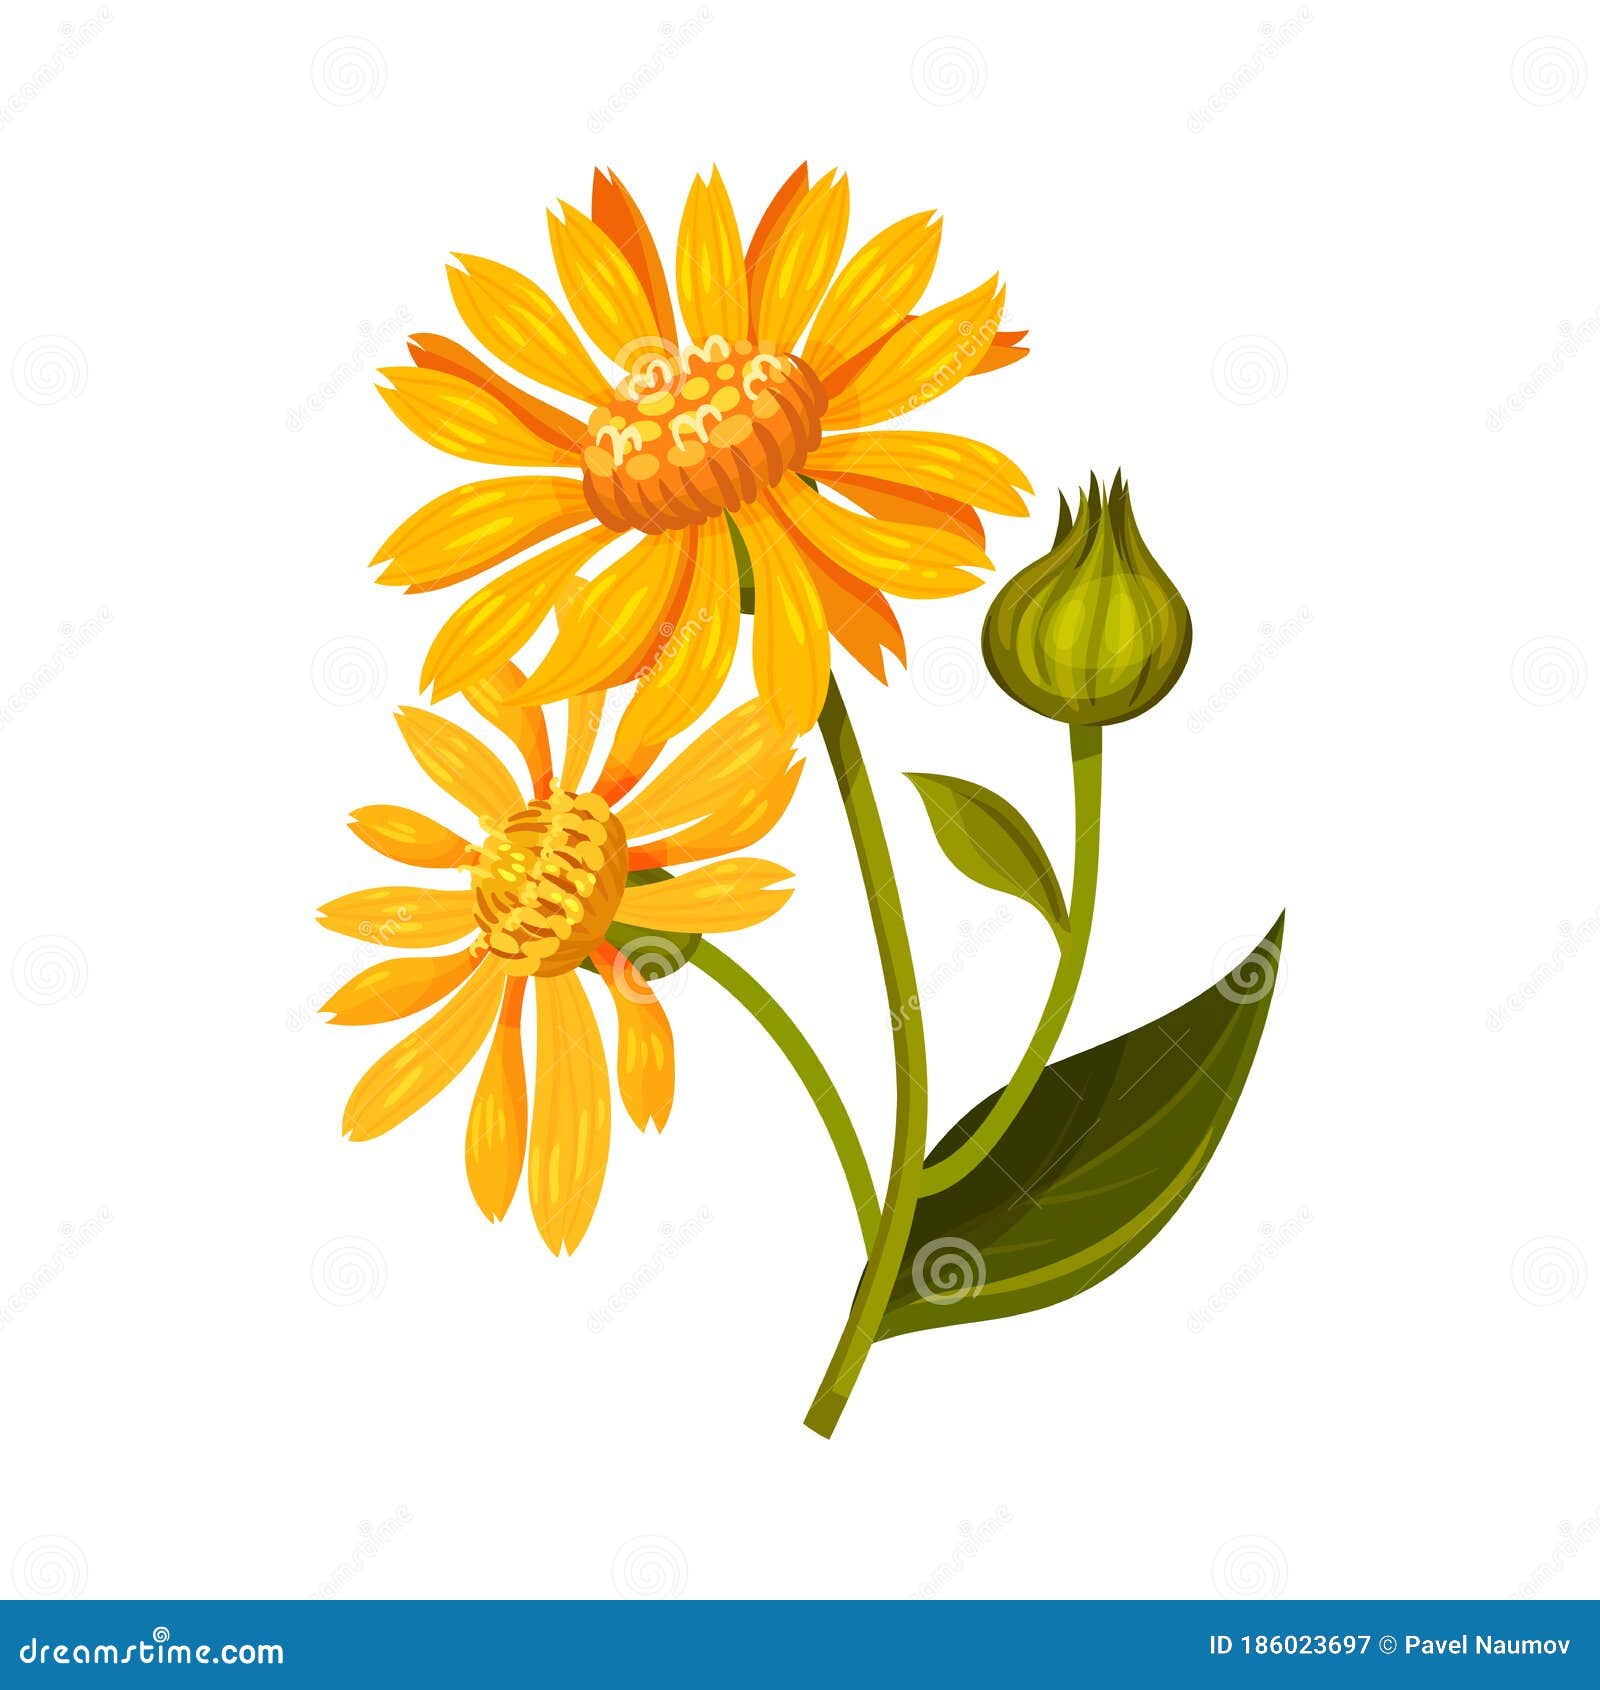 arnica yellow or orange flower head with long ray florets on green stem  